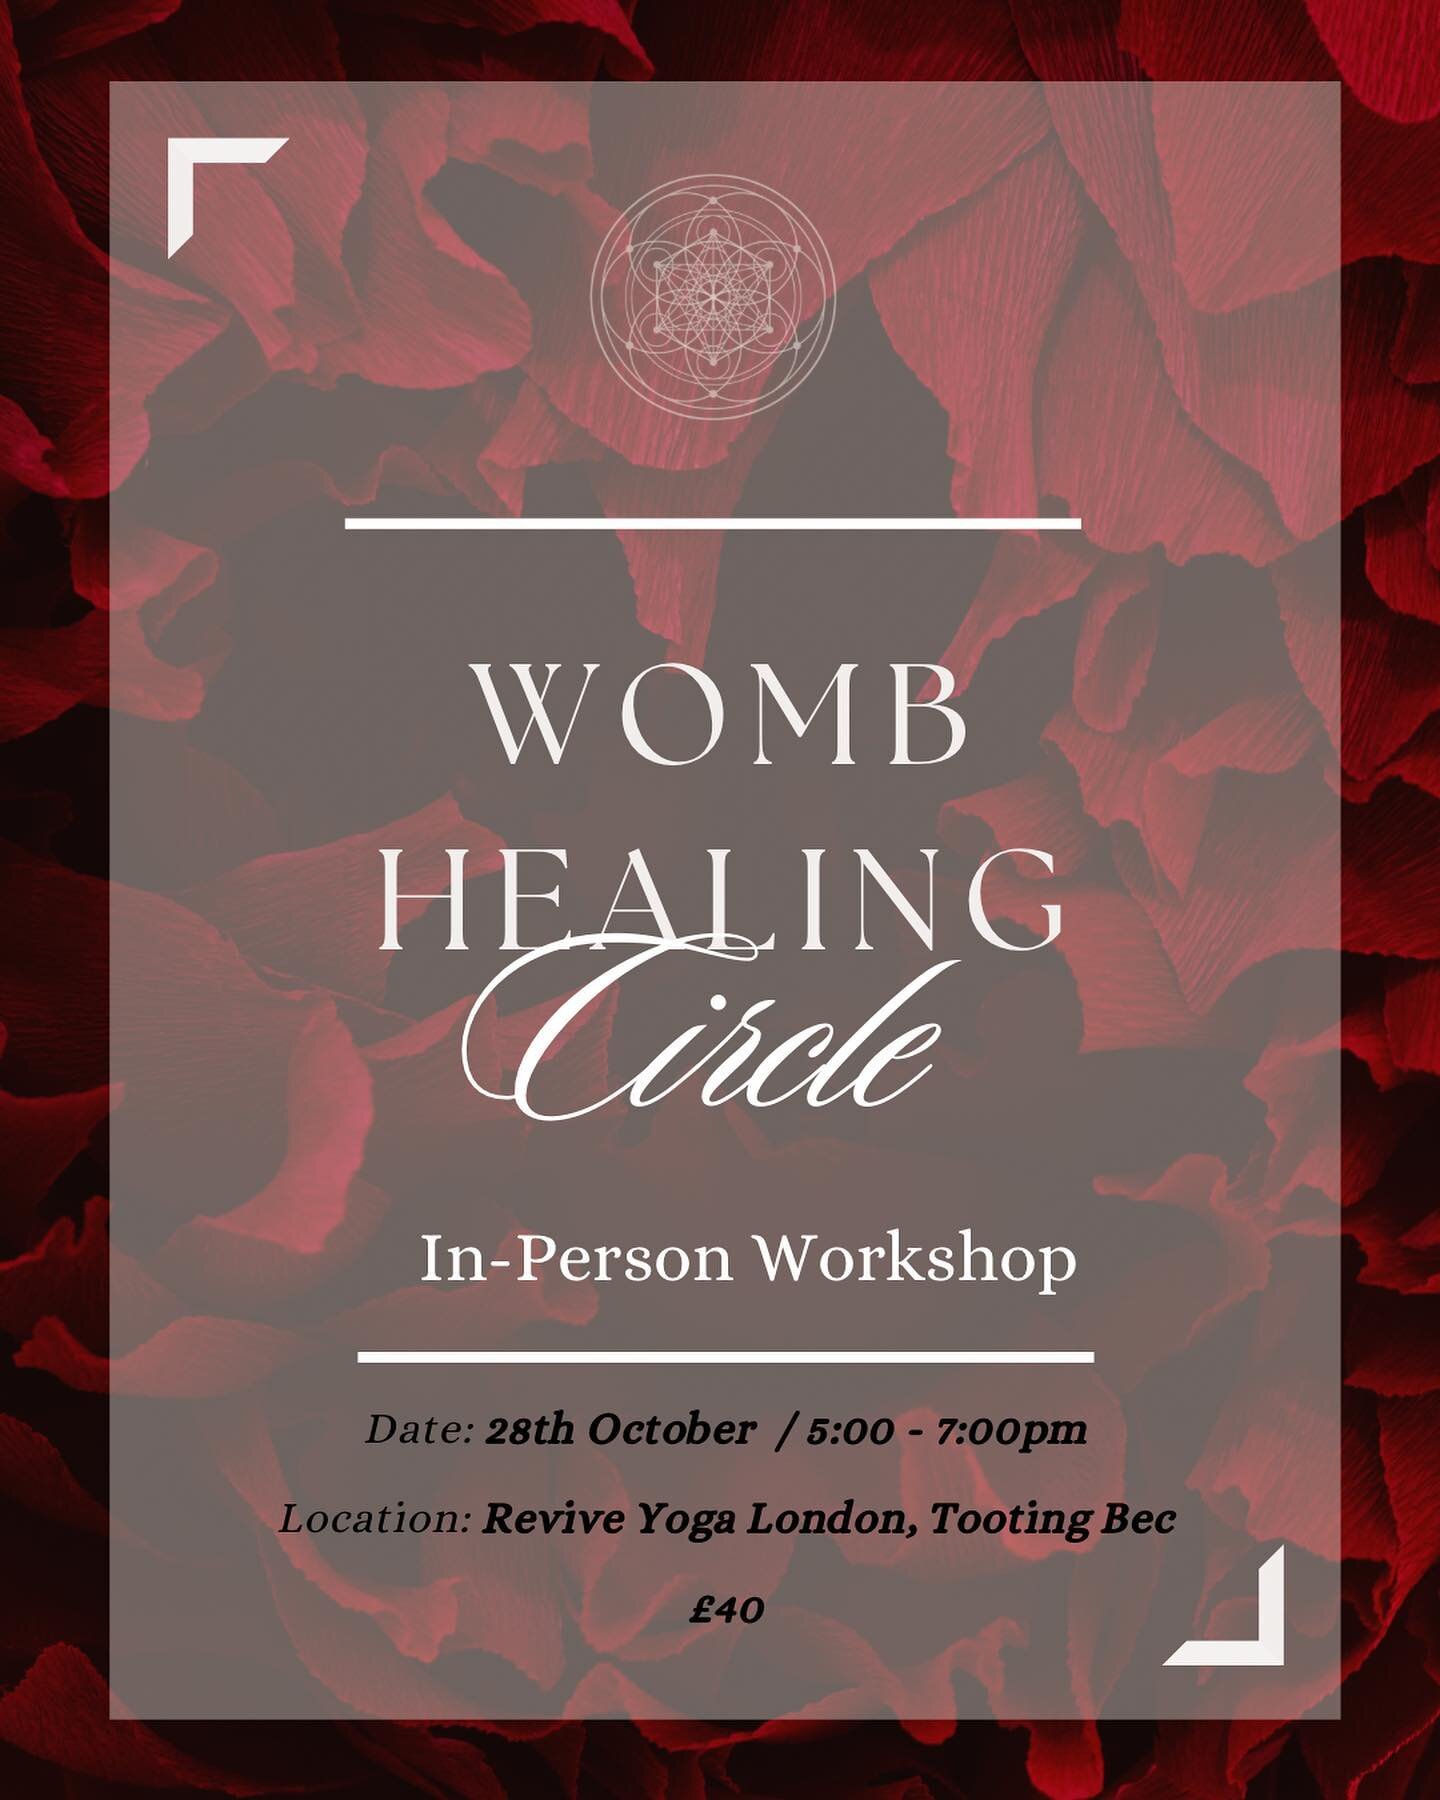 Join us for a magical evening of womb healing in Tooting Bec on Saturday 28th October 5-7pm. 

We will dive deep into reawakening our wombs under the energy of the Full Moon in Taurus. In a safe circle of likeminded women, we will be nourishing our b